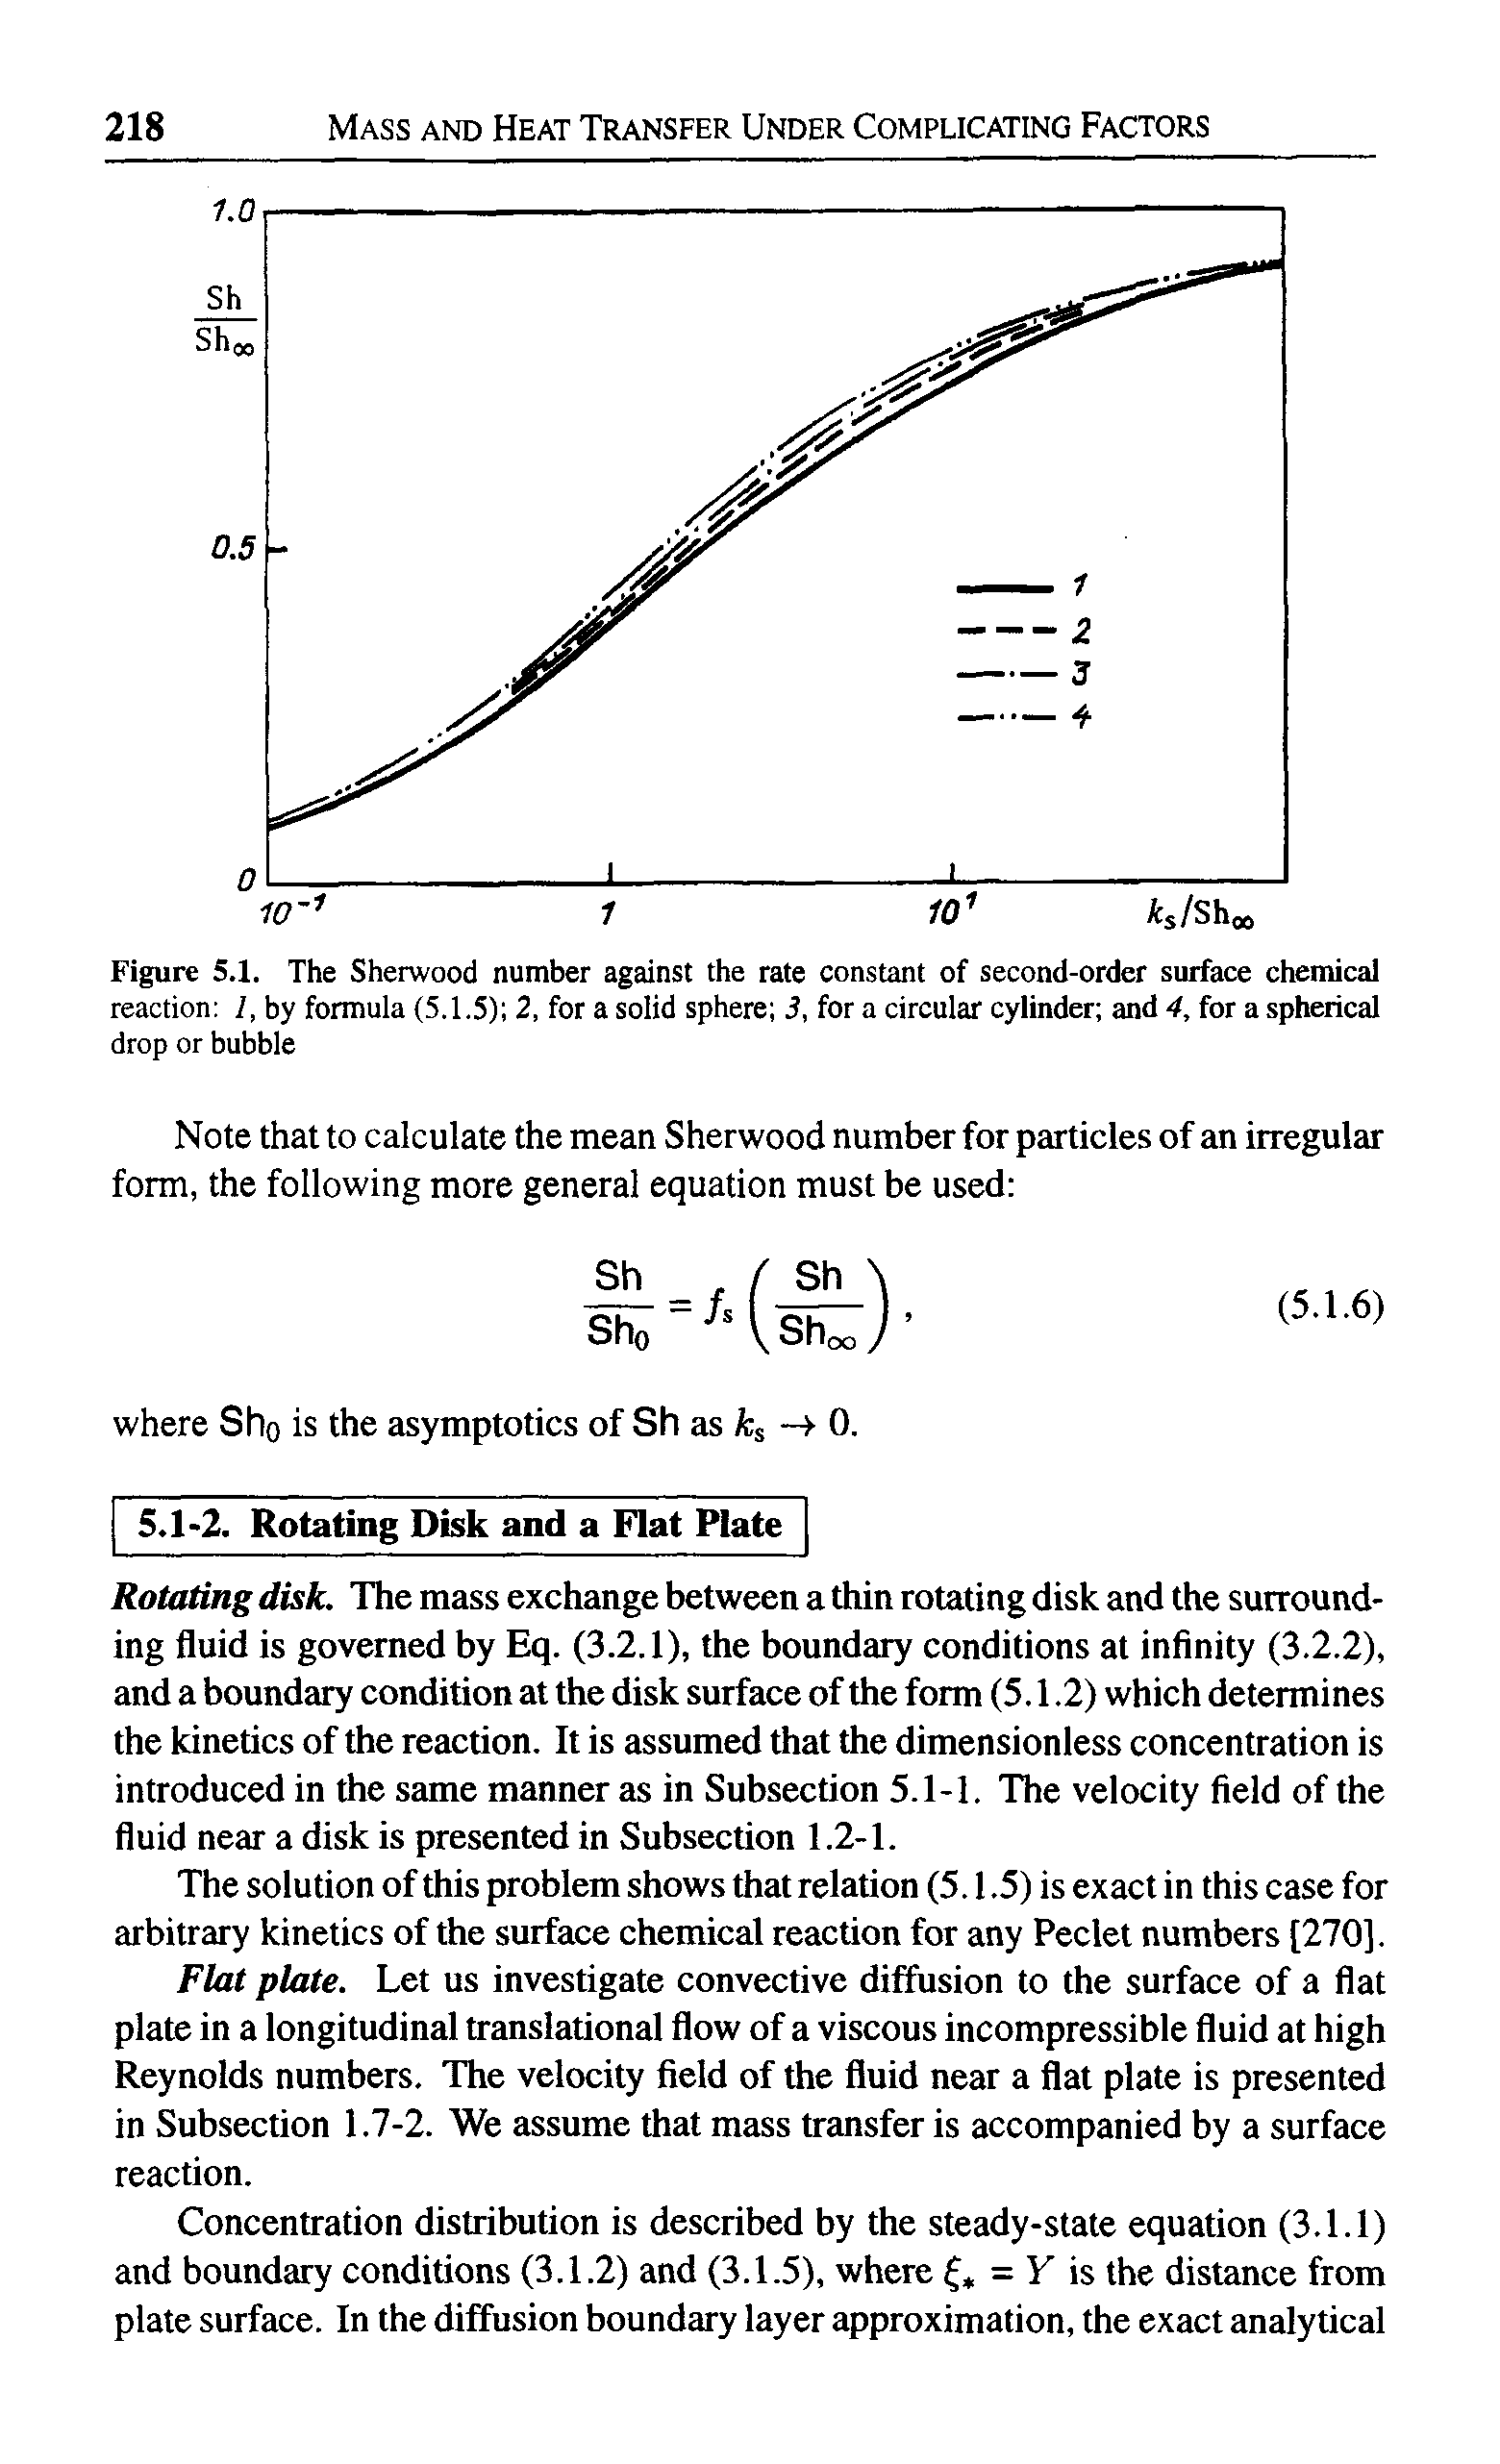 Figure 5.1. The Sherwood number against the rate constant of second-order surface chemical reaction 1, by formula (5.1.5) 2, for a solid sphere 3, for a circular cylinder and 4, for a spherical drop or bubble...